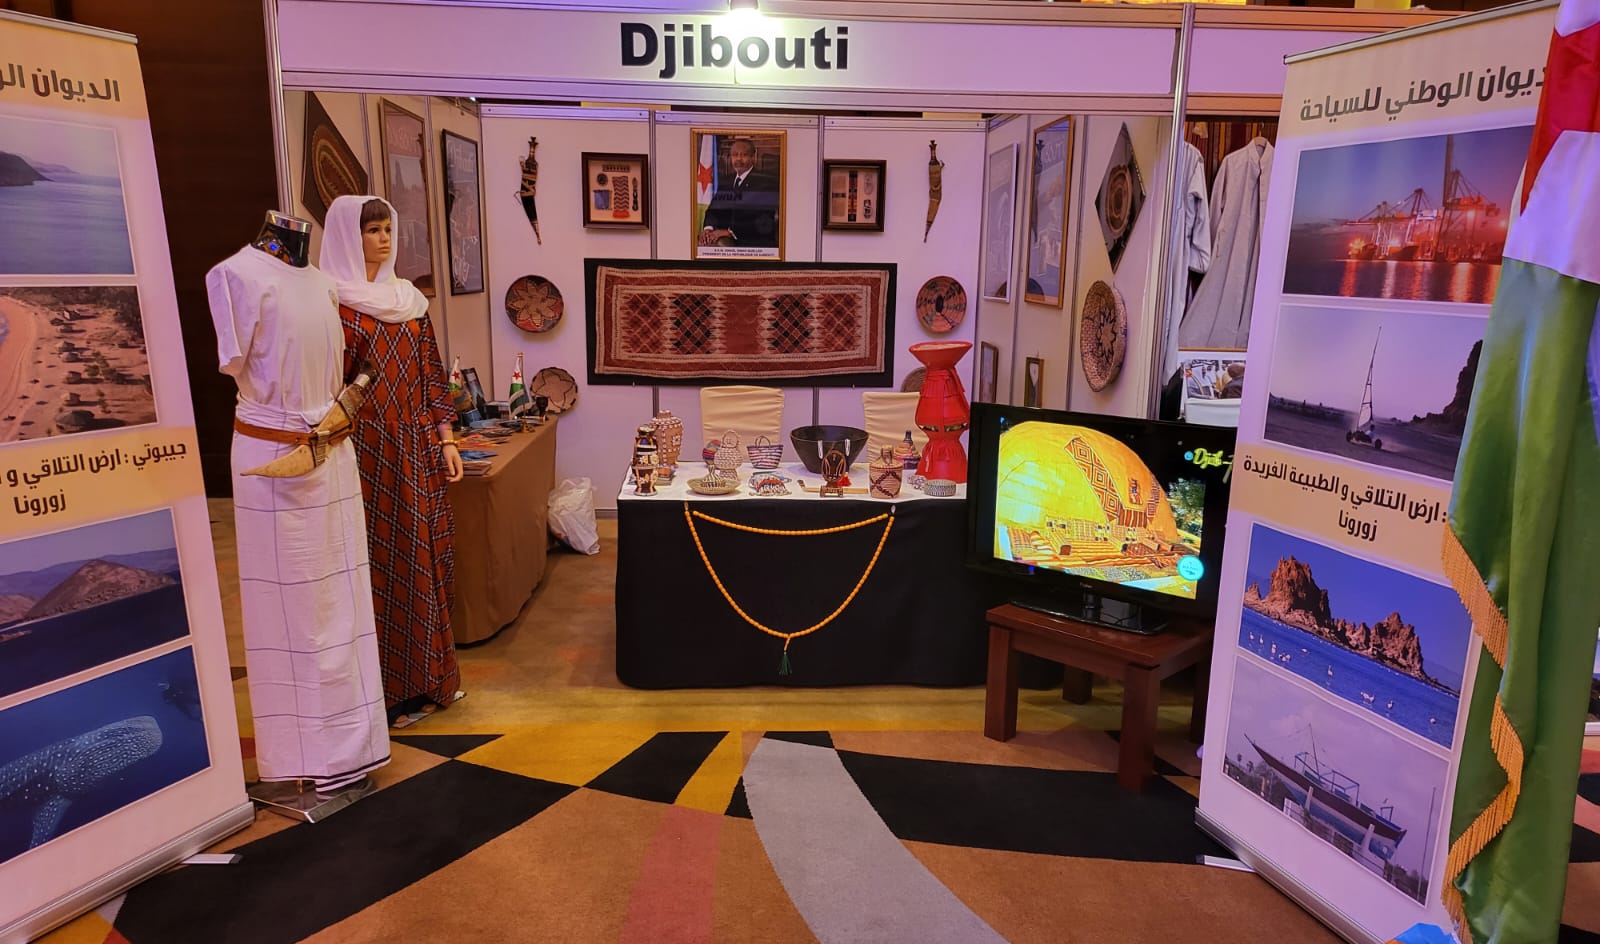 The participation of the Embassy of the Republic of Djibouti in the Africa Day Celebrations to the state of Kuwait